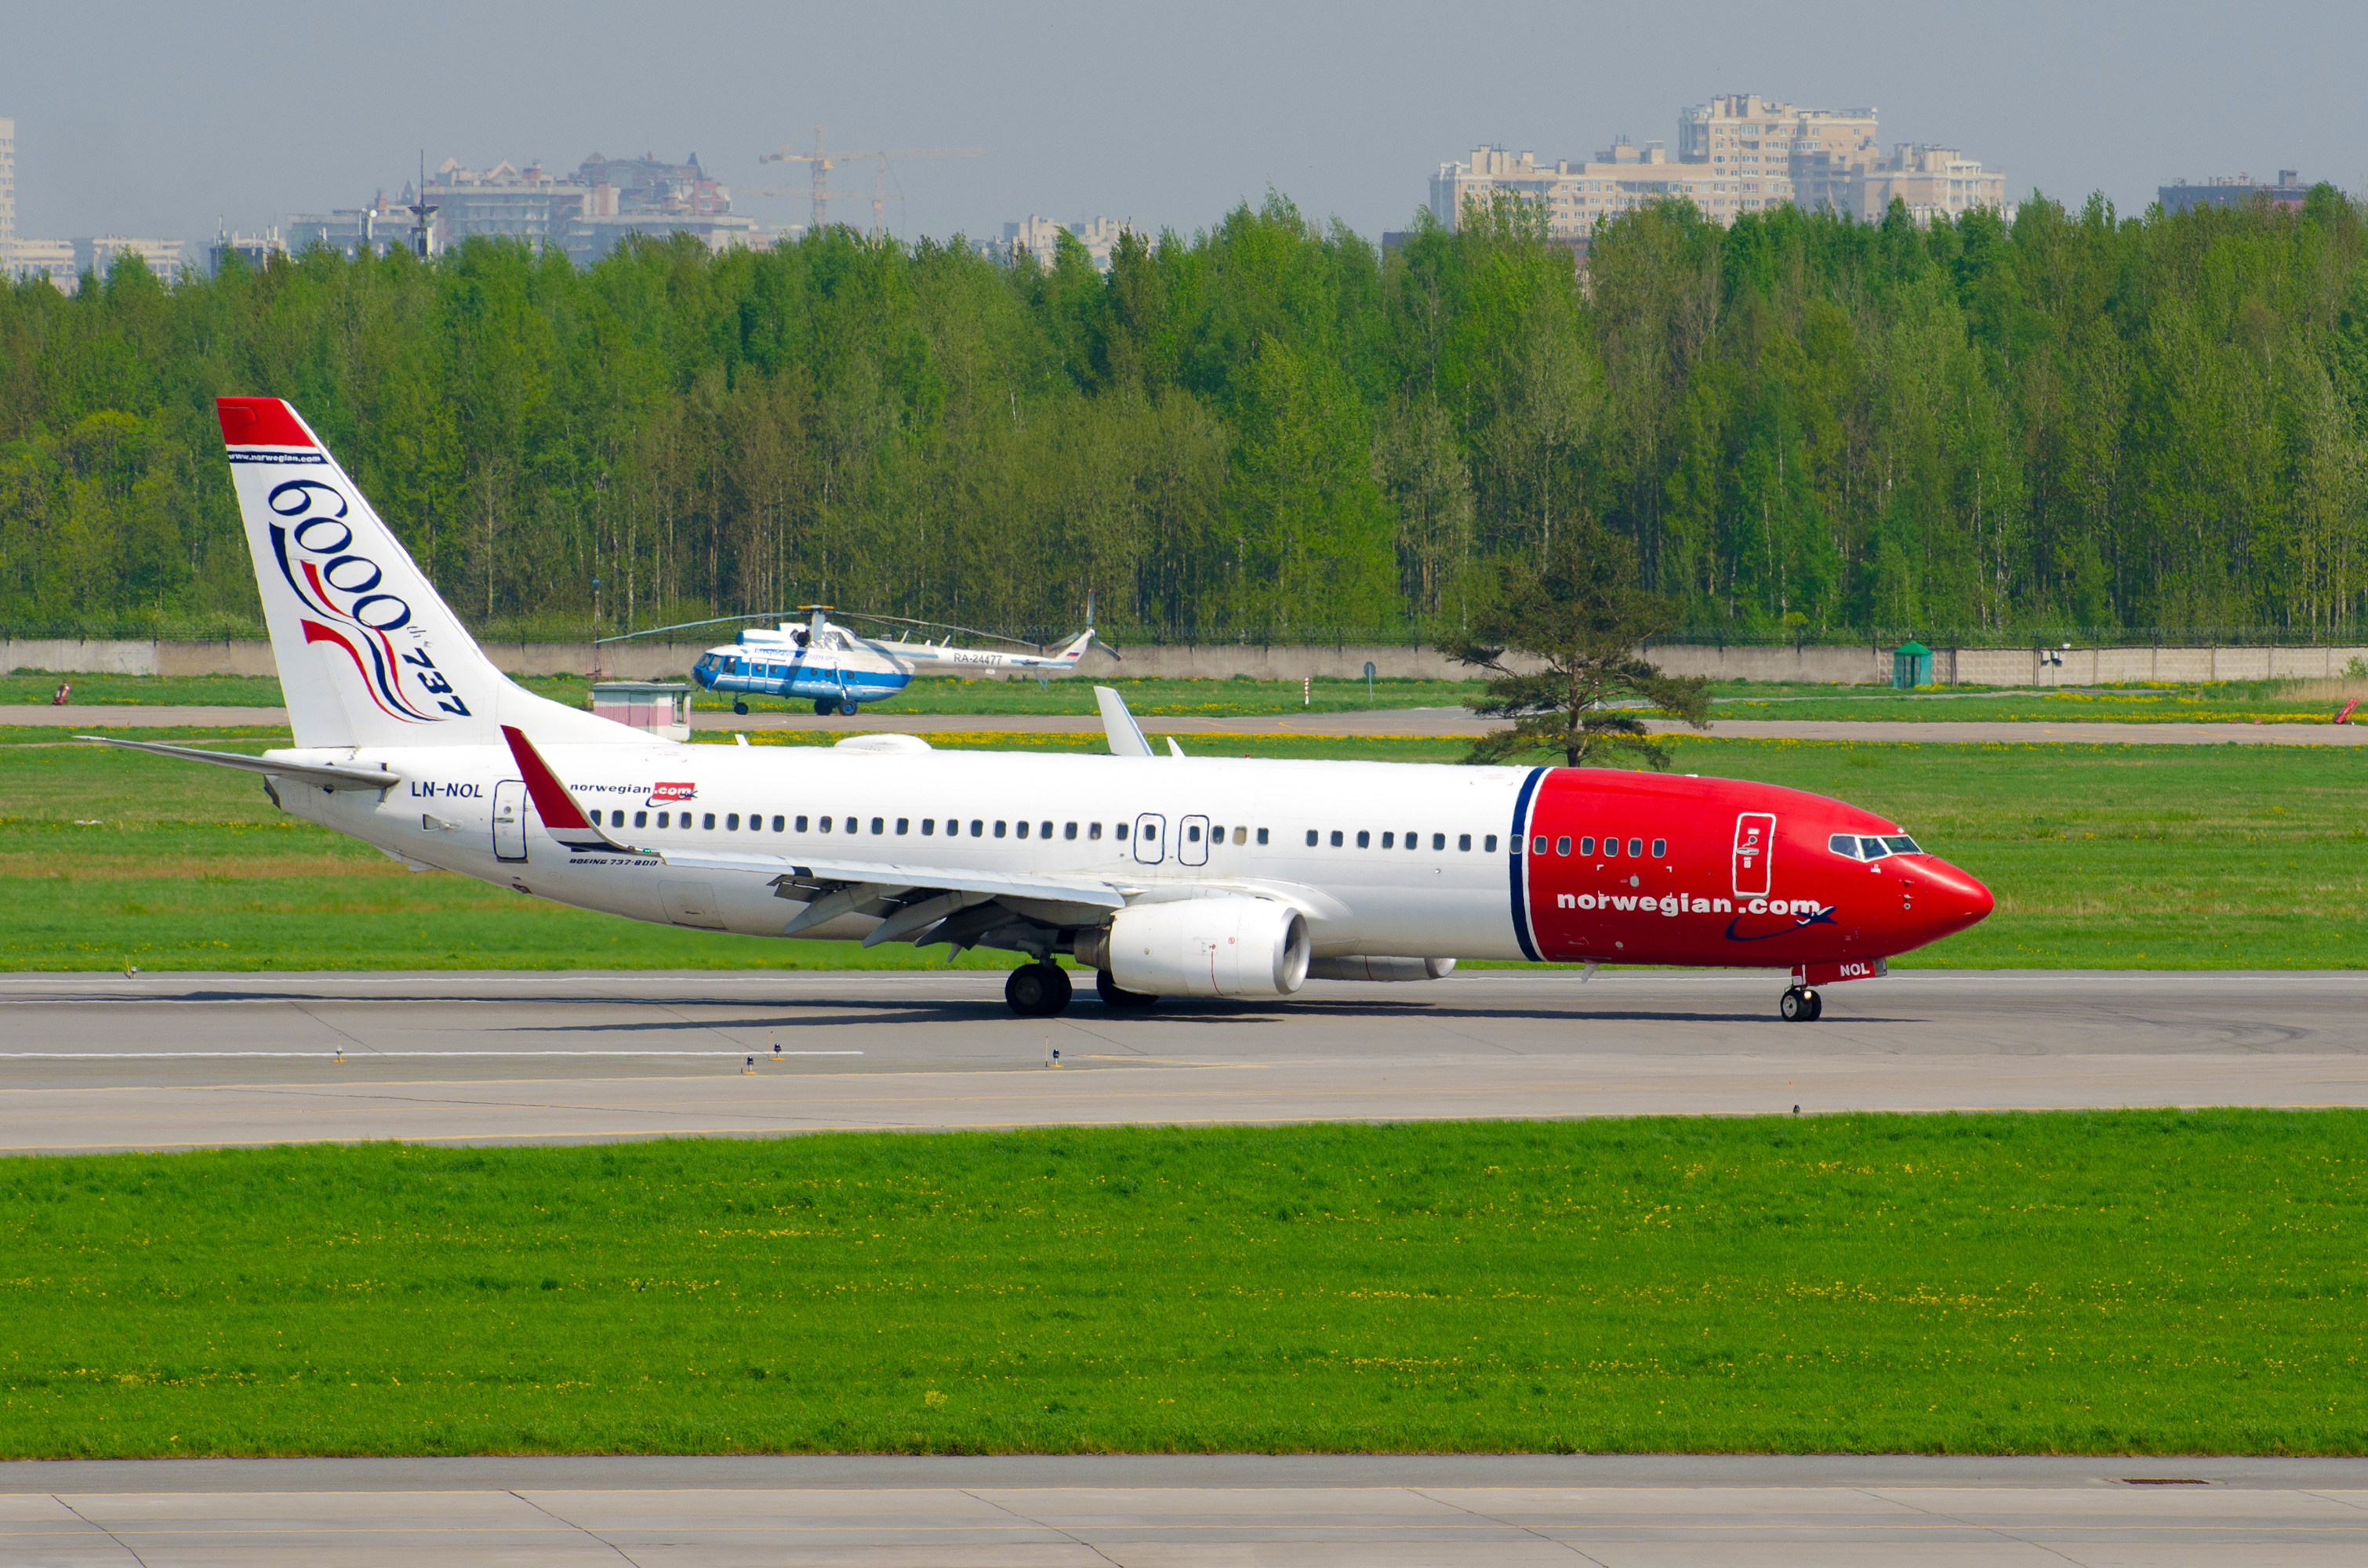 compagnie low cost+norwegian airlines+primera air faillite+wow air rachat+low cost long courier